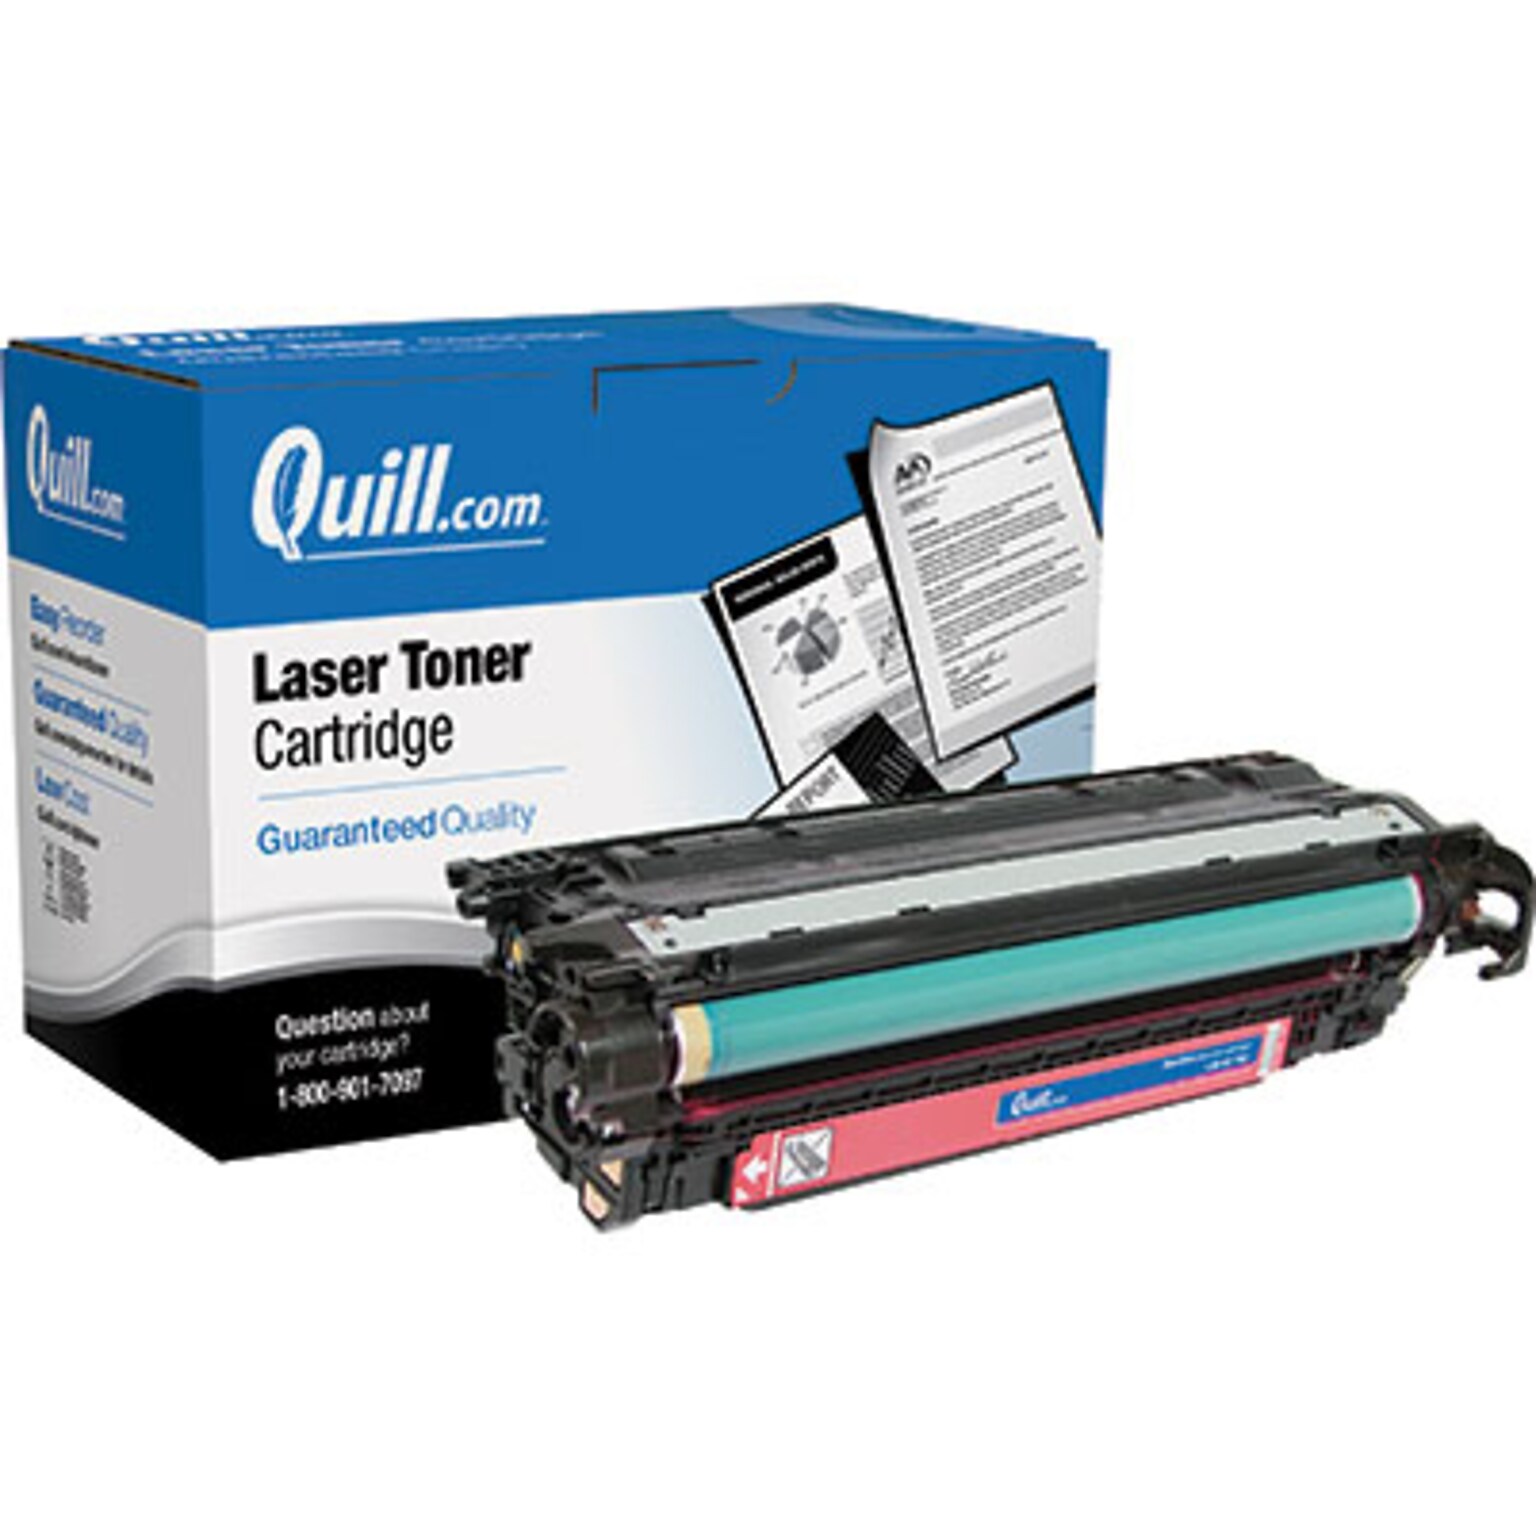 Quill Brand Remanufactured HP 504A (CE253A) Magenta Laser Toner Cartridge (100% Satisfaction Guaranteed)